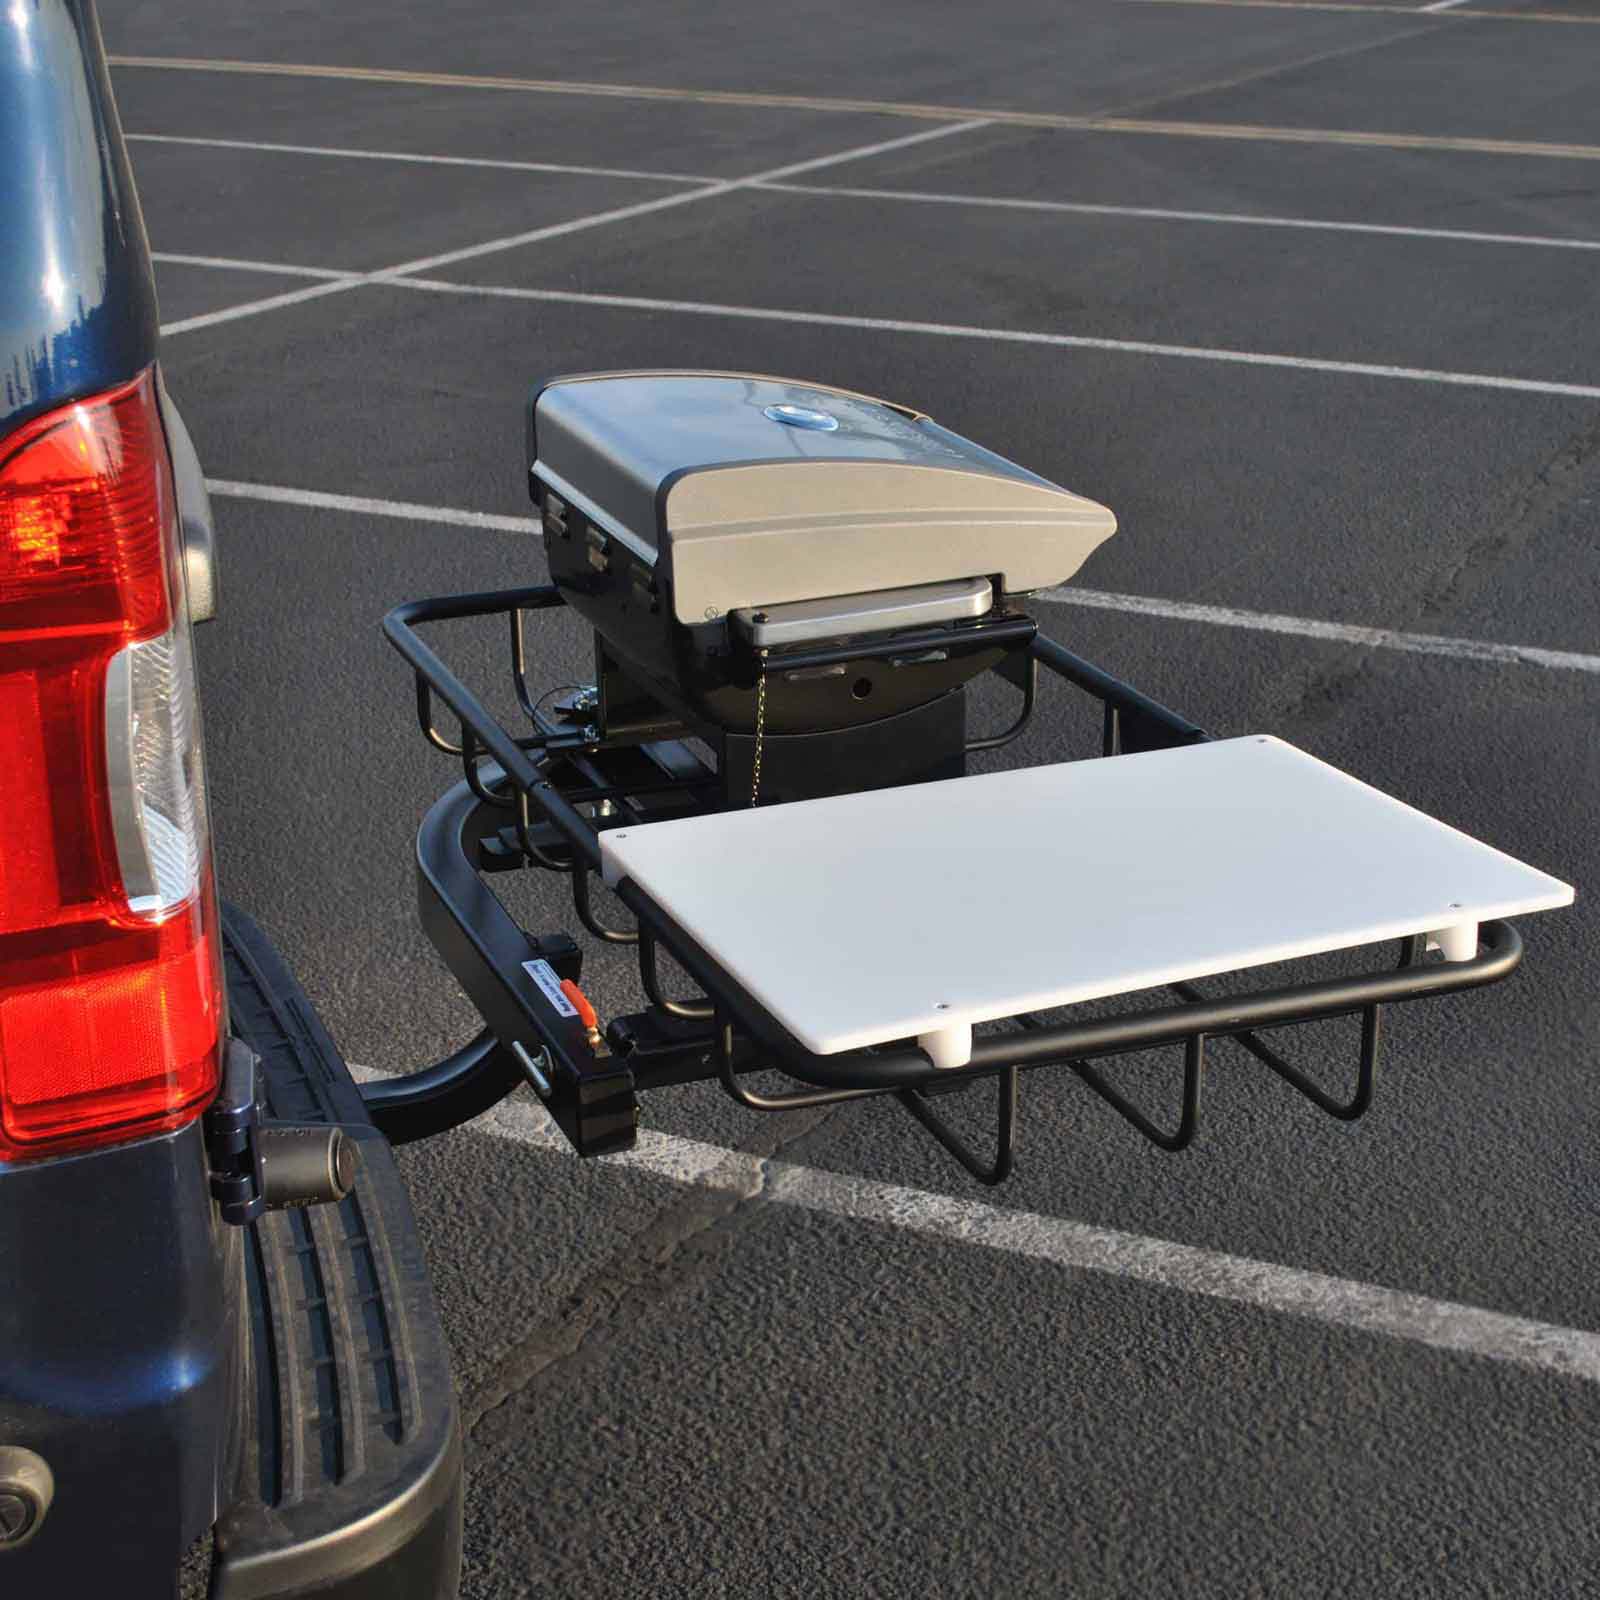 https://www.stowaway2.com/resize/Shared/Images/Product/Tailgate-Hitch-Grill-Station/Specialty-Racks_hitch-grill-station-in-parking-lot-Original.jpg?bw=525&w=525&bh=525&h=525